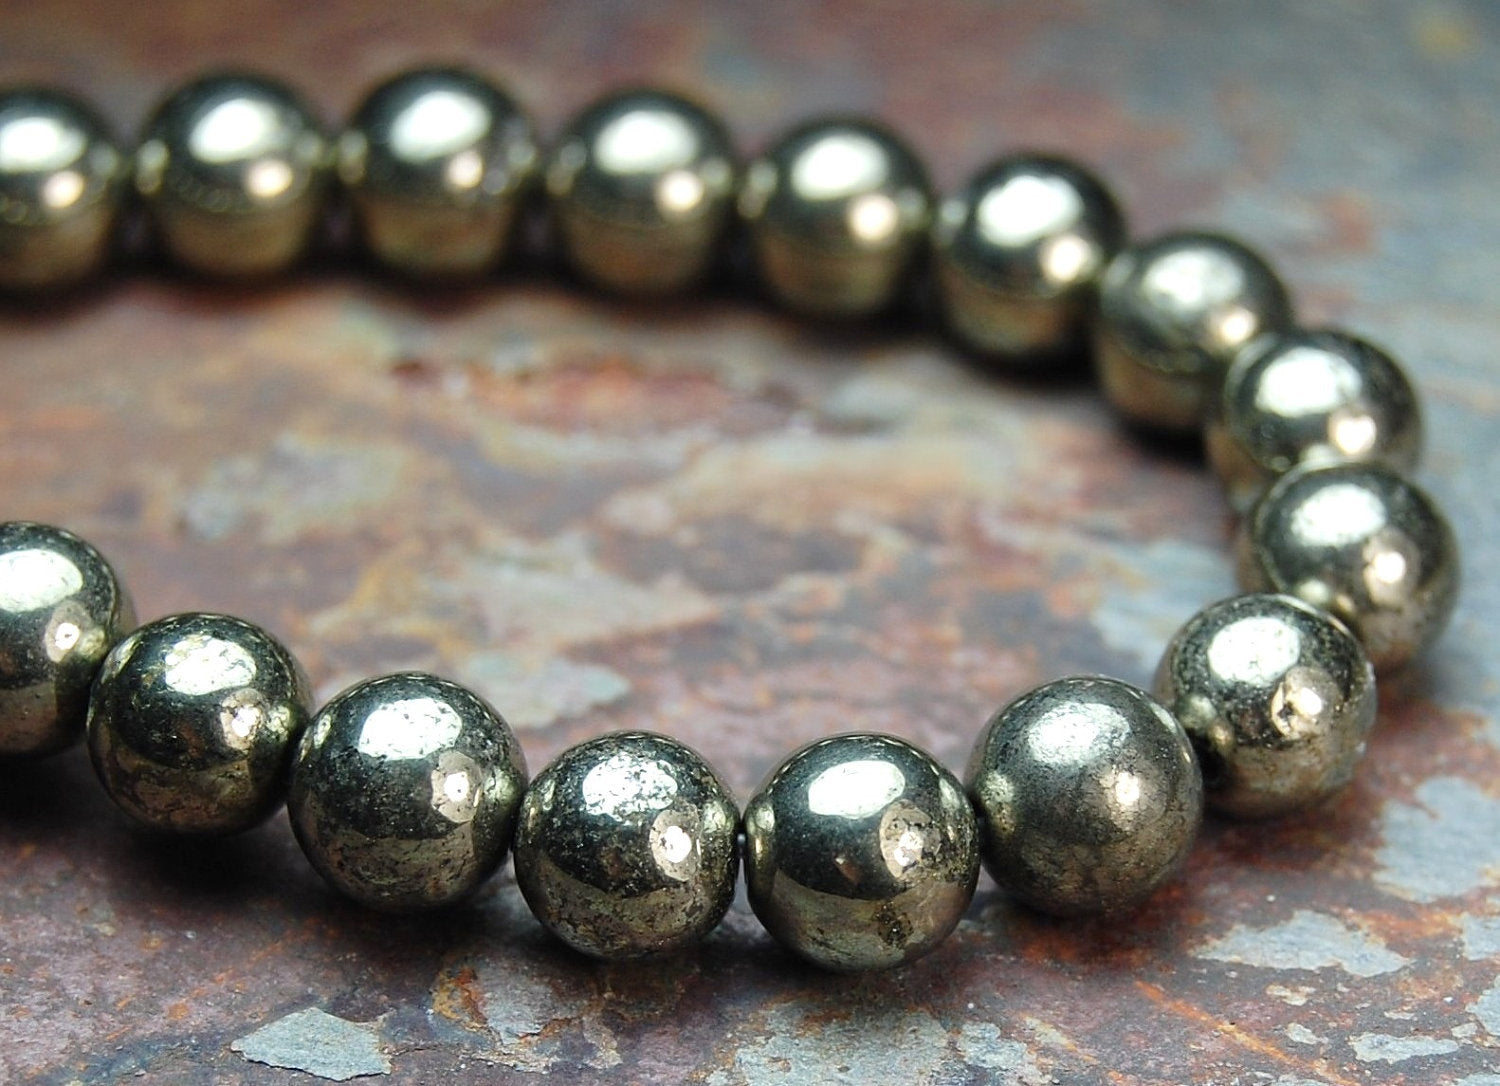 Natural Pyrite Beads 4mm Round (A grade) -15.5 inch strand